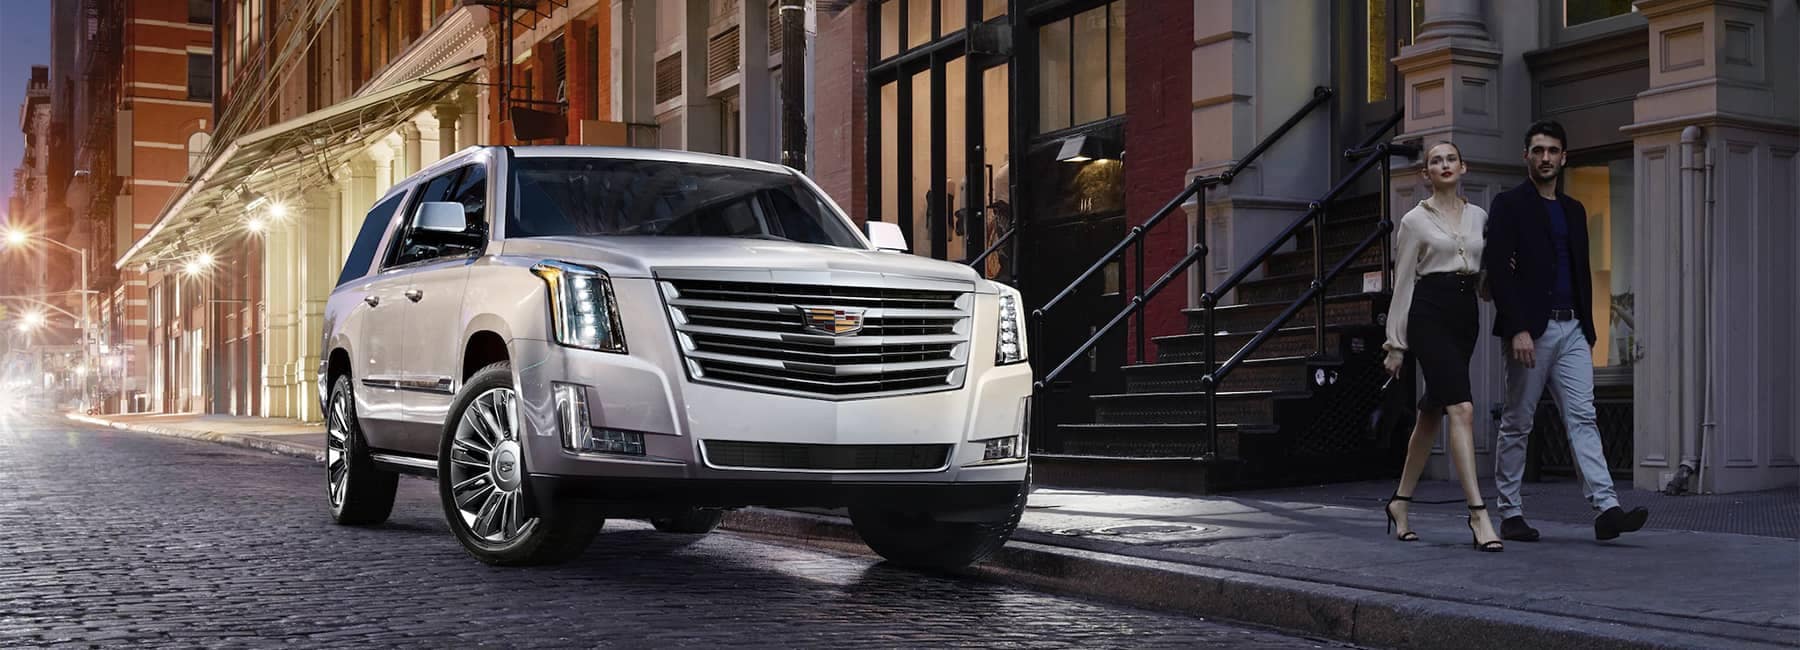 2020 Cadillac Escalade Full-Size SUV Front Exterior Parked